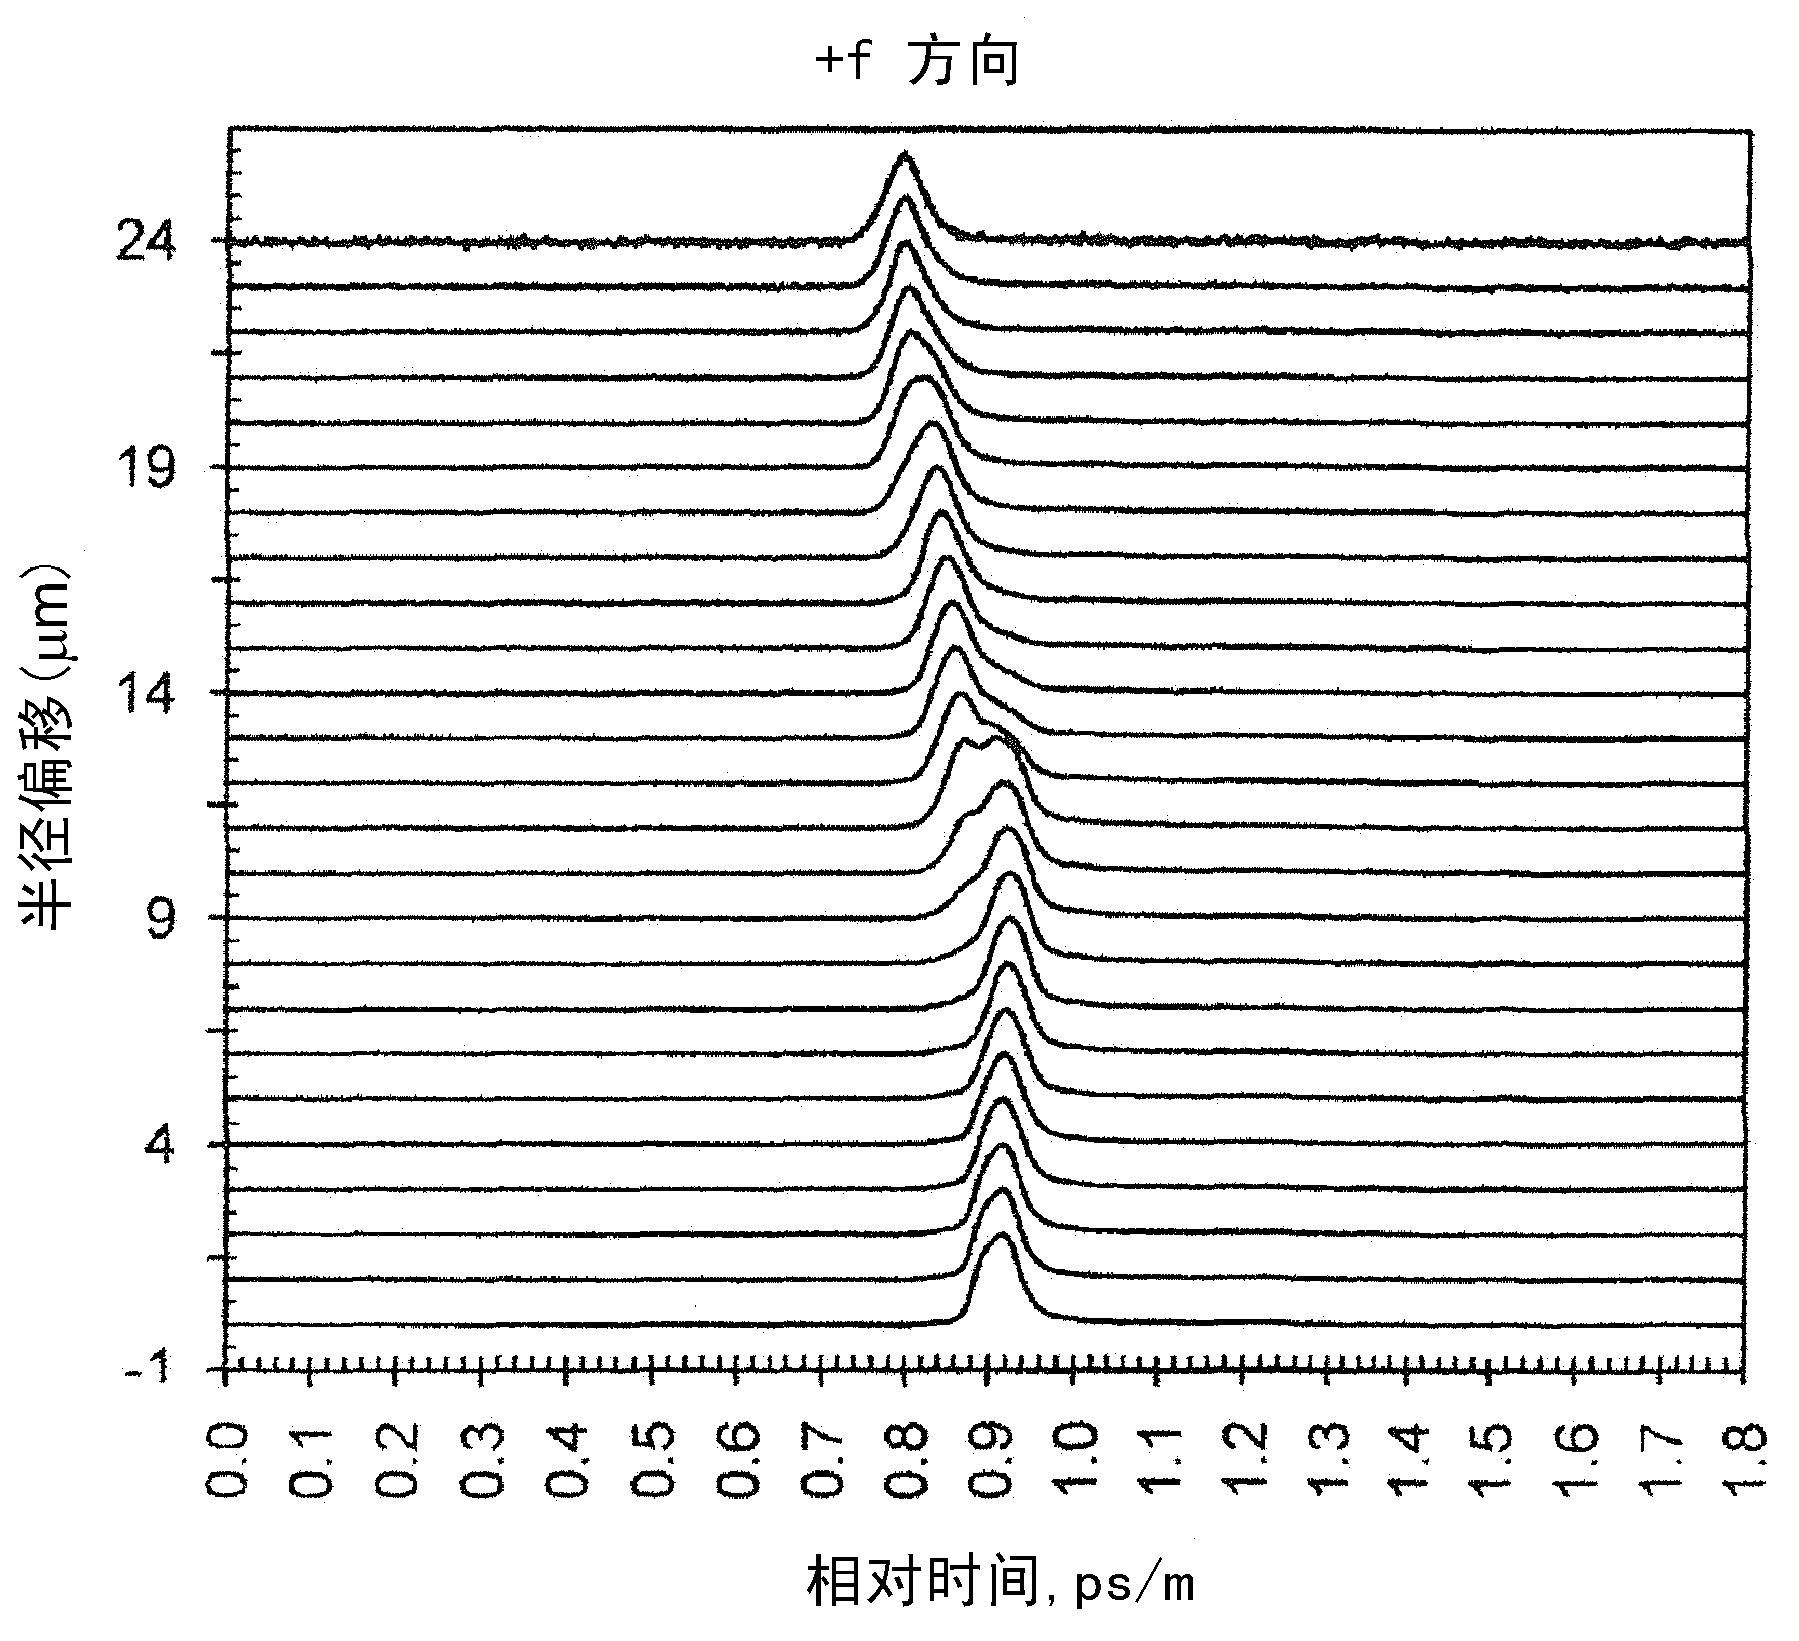 Method for designing and selecting optical fiber for use with transmitter optical subassembly